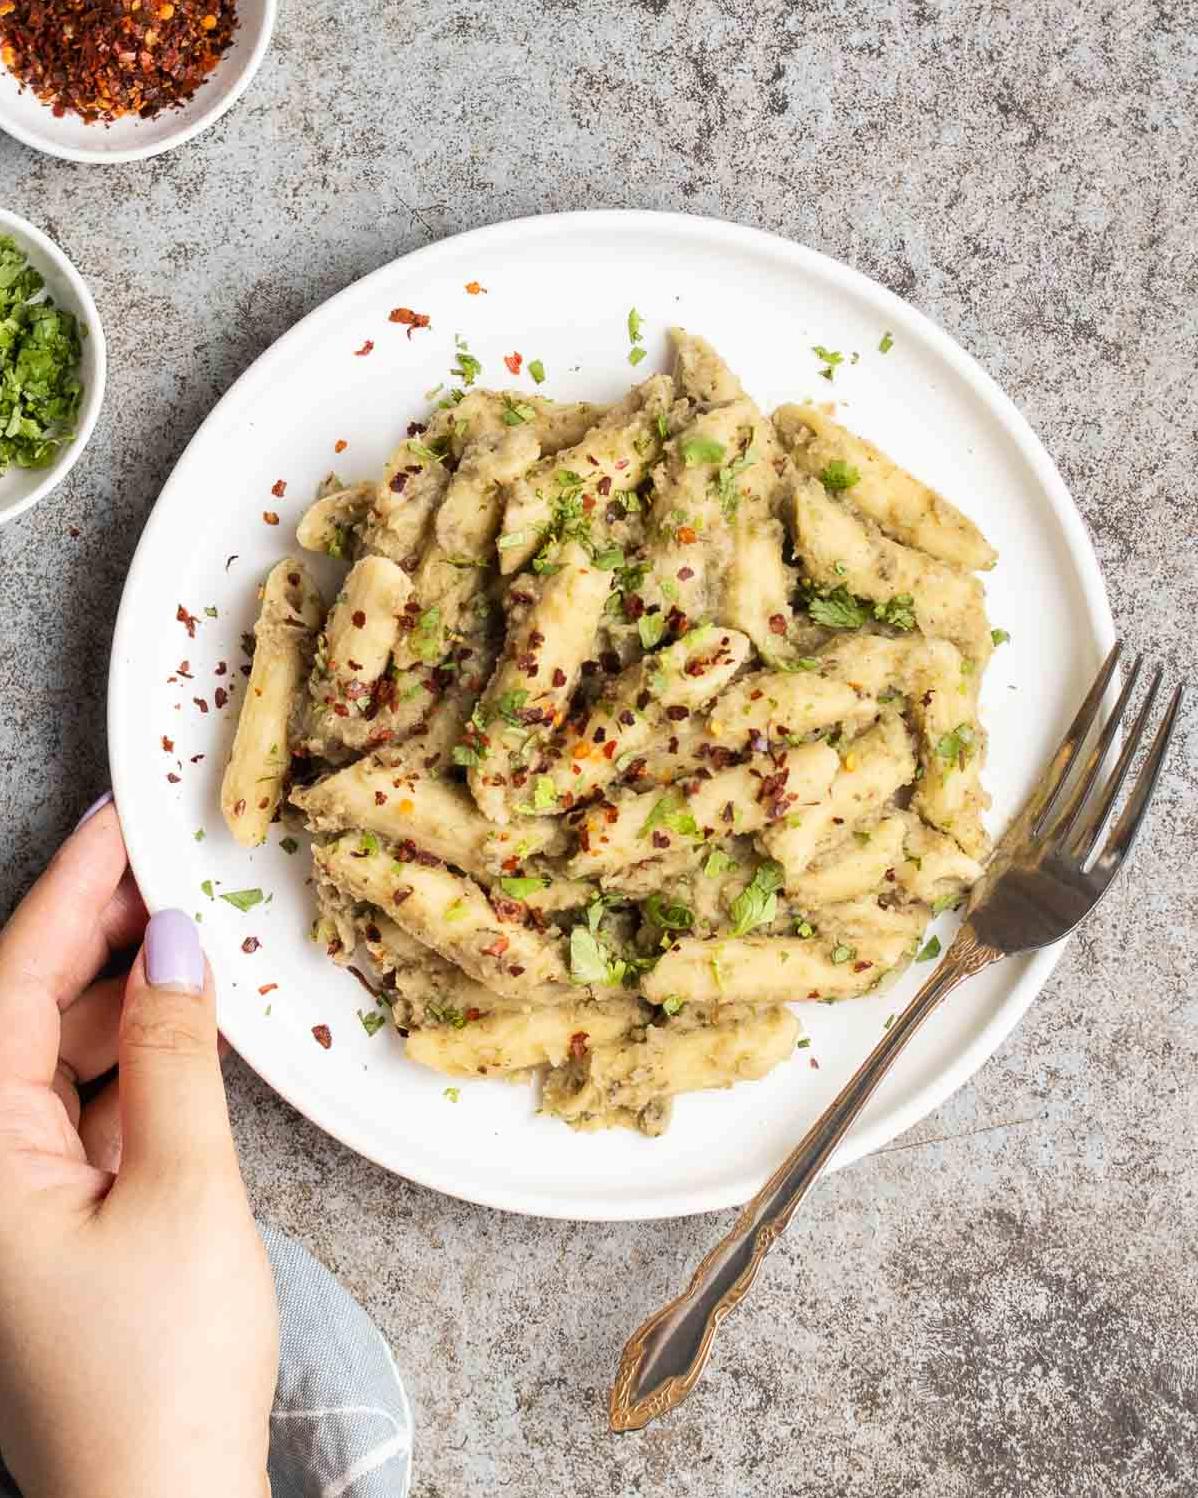  This vegan penne pasta and